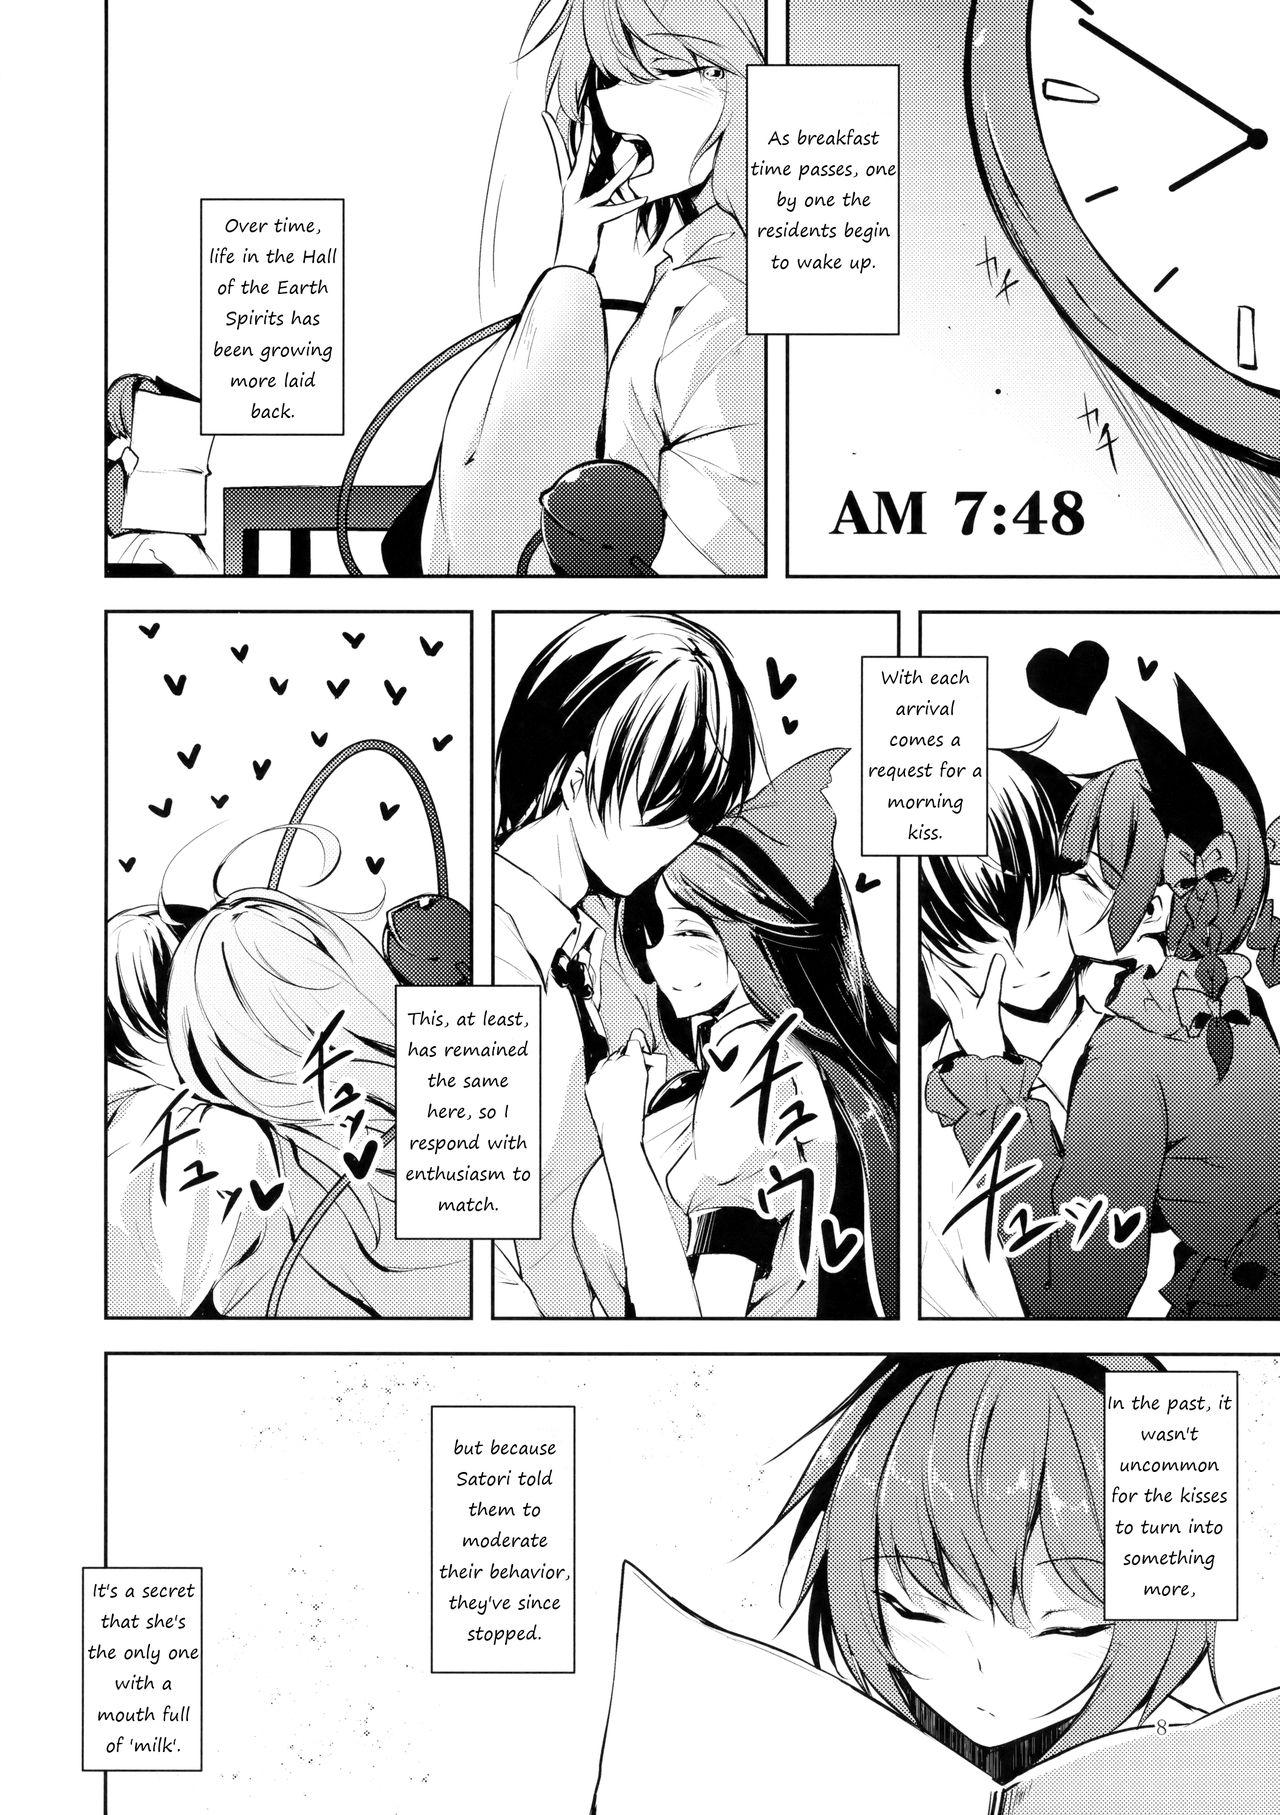 Dicks Komeiji Schedule AM - Touhou project Camshow - Page 9